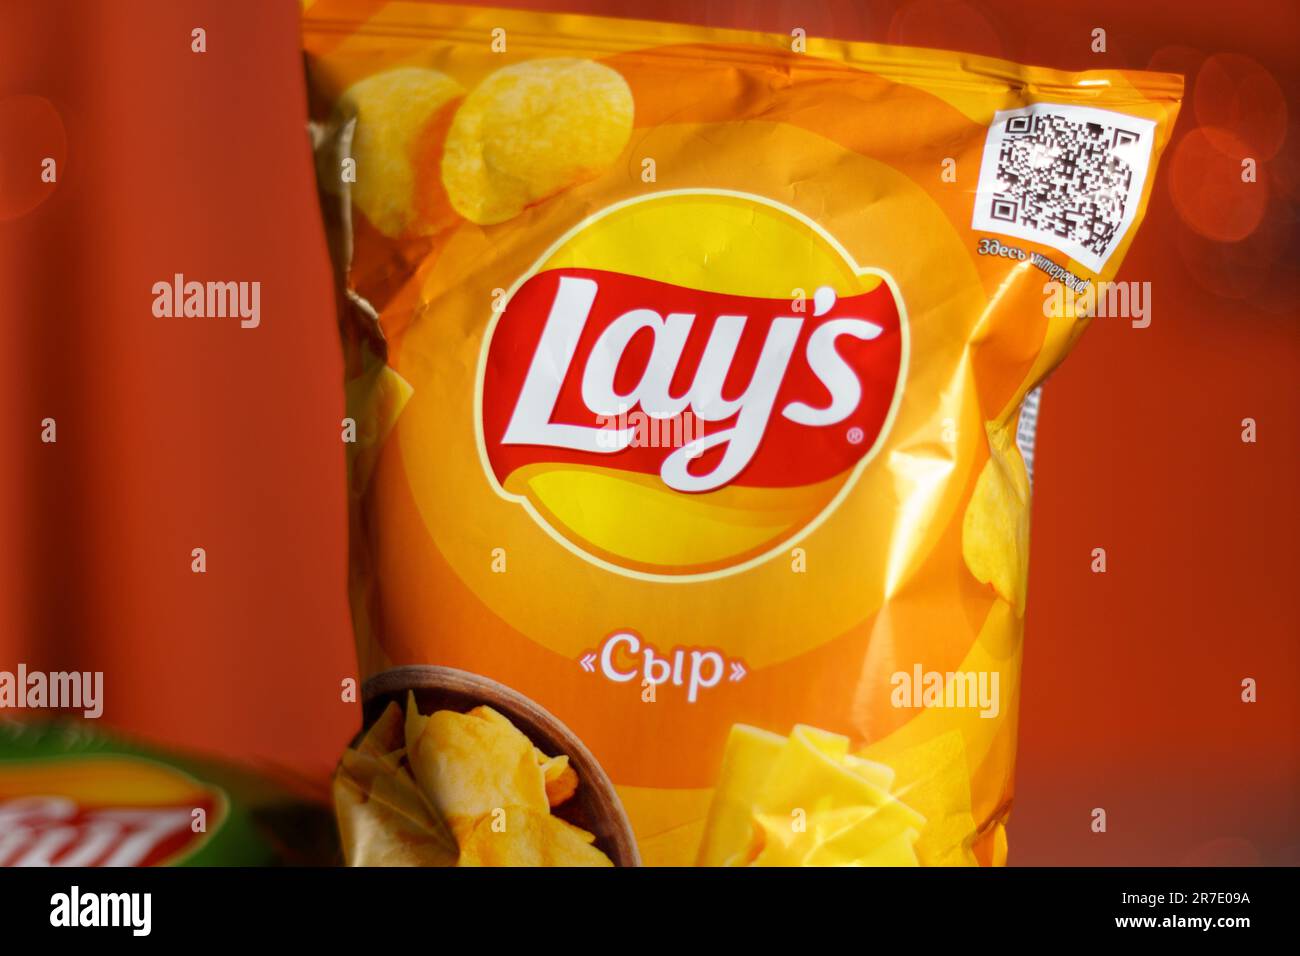 Lay's: lot 12 et 15 paquets Chips